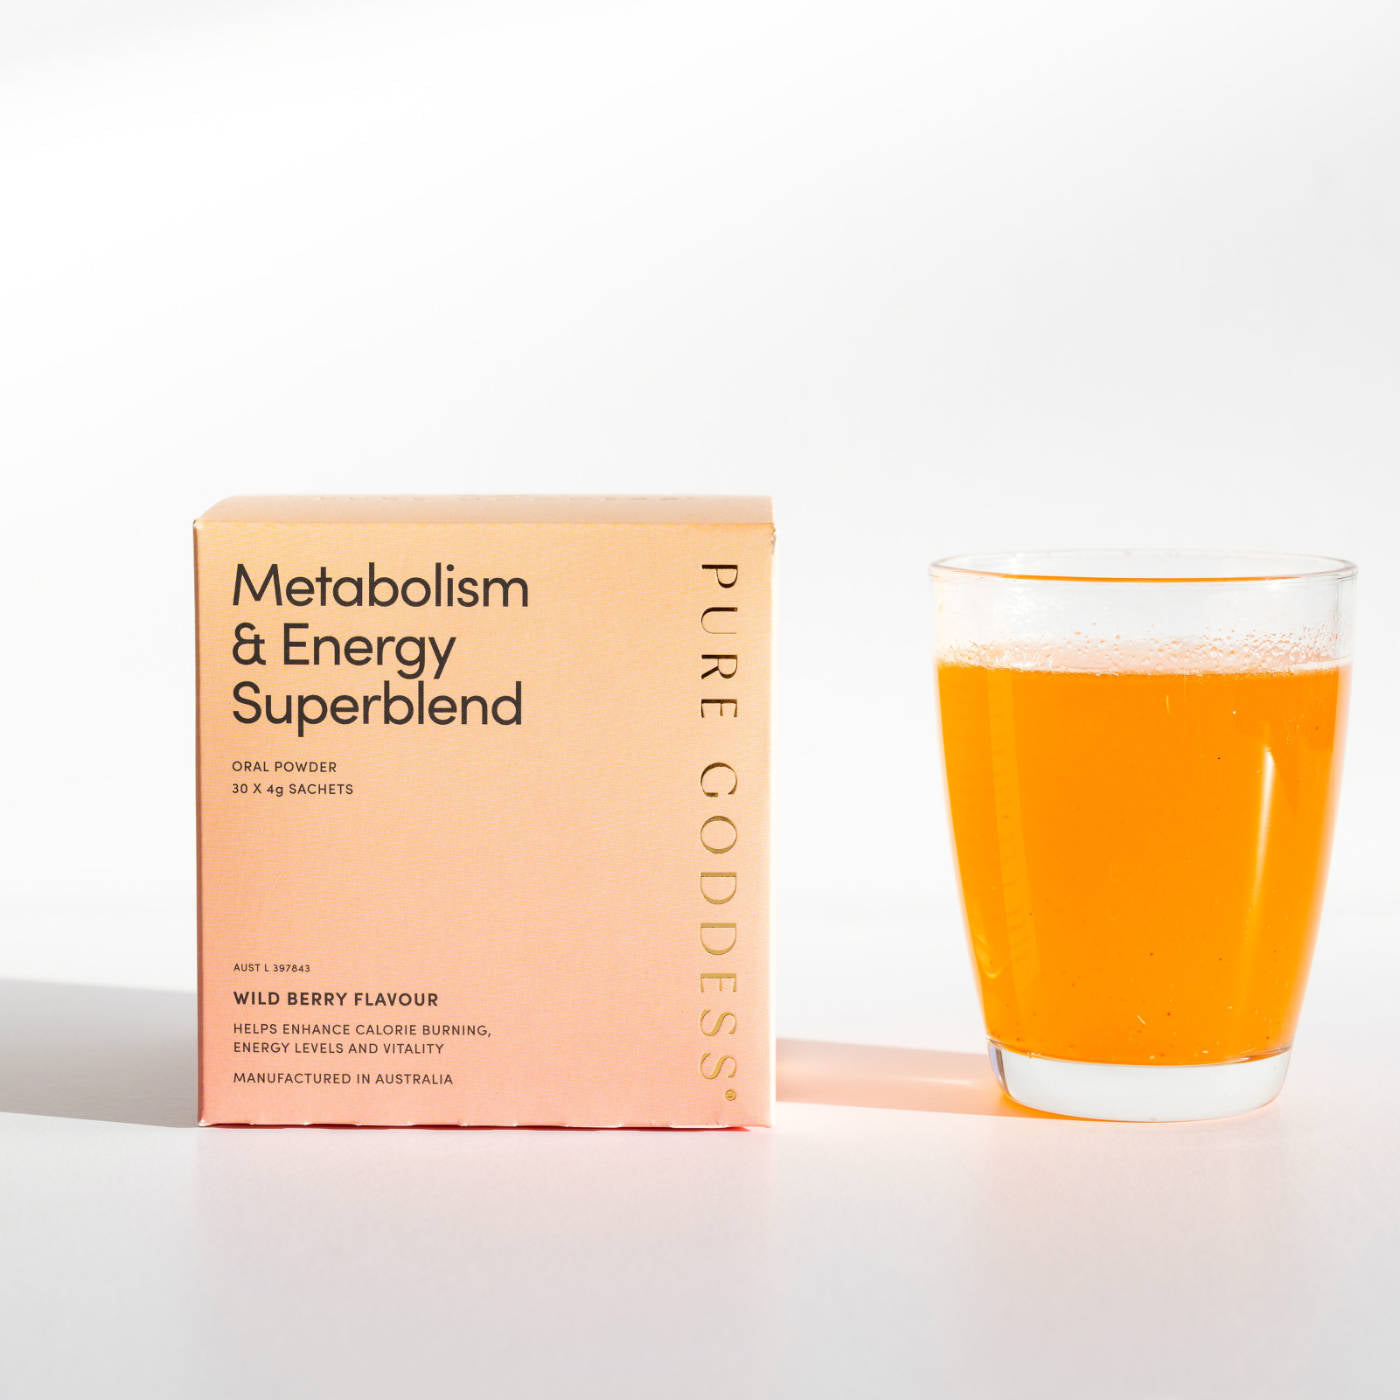 WHAT METABOLISM & ENERGY SUPERBLEND CAN DO FOR YOU - THE SCIENTIFIC FACTS